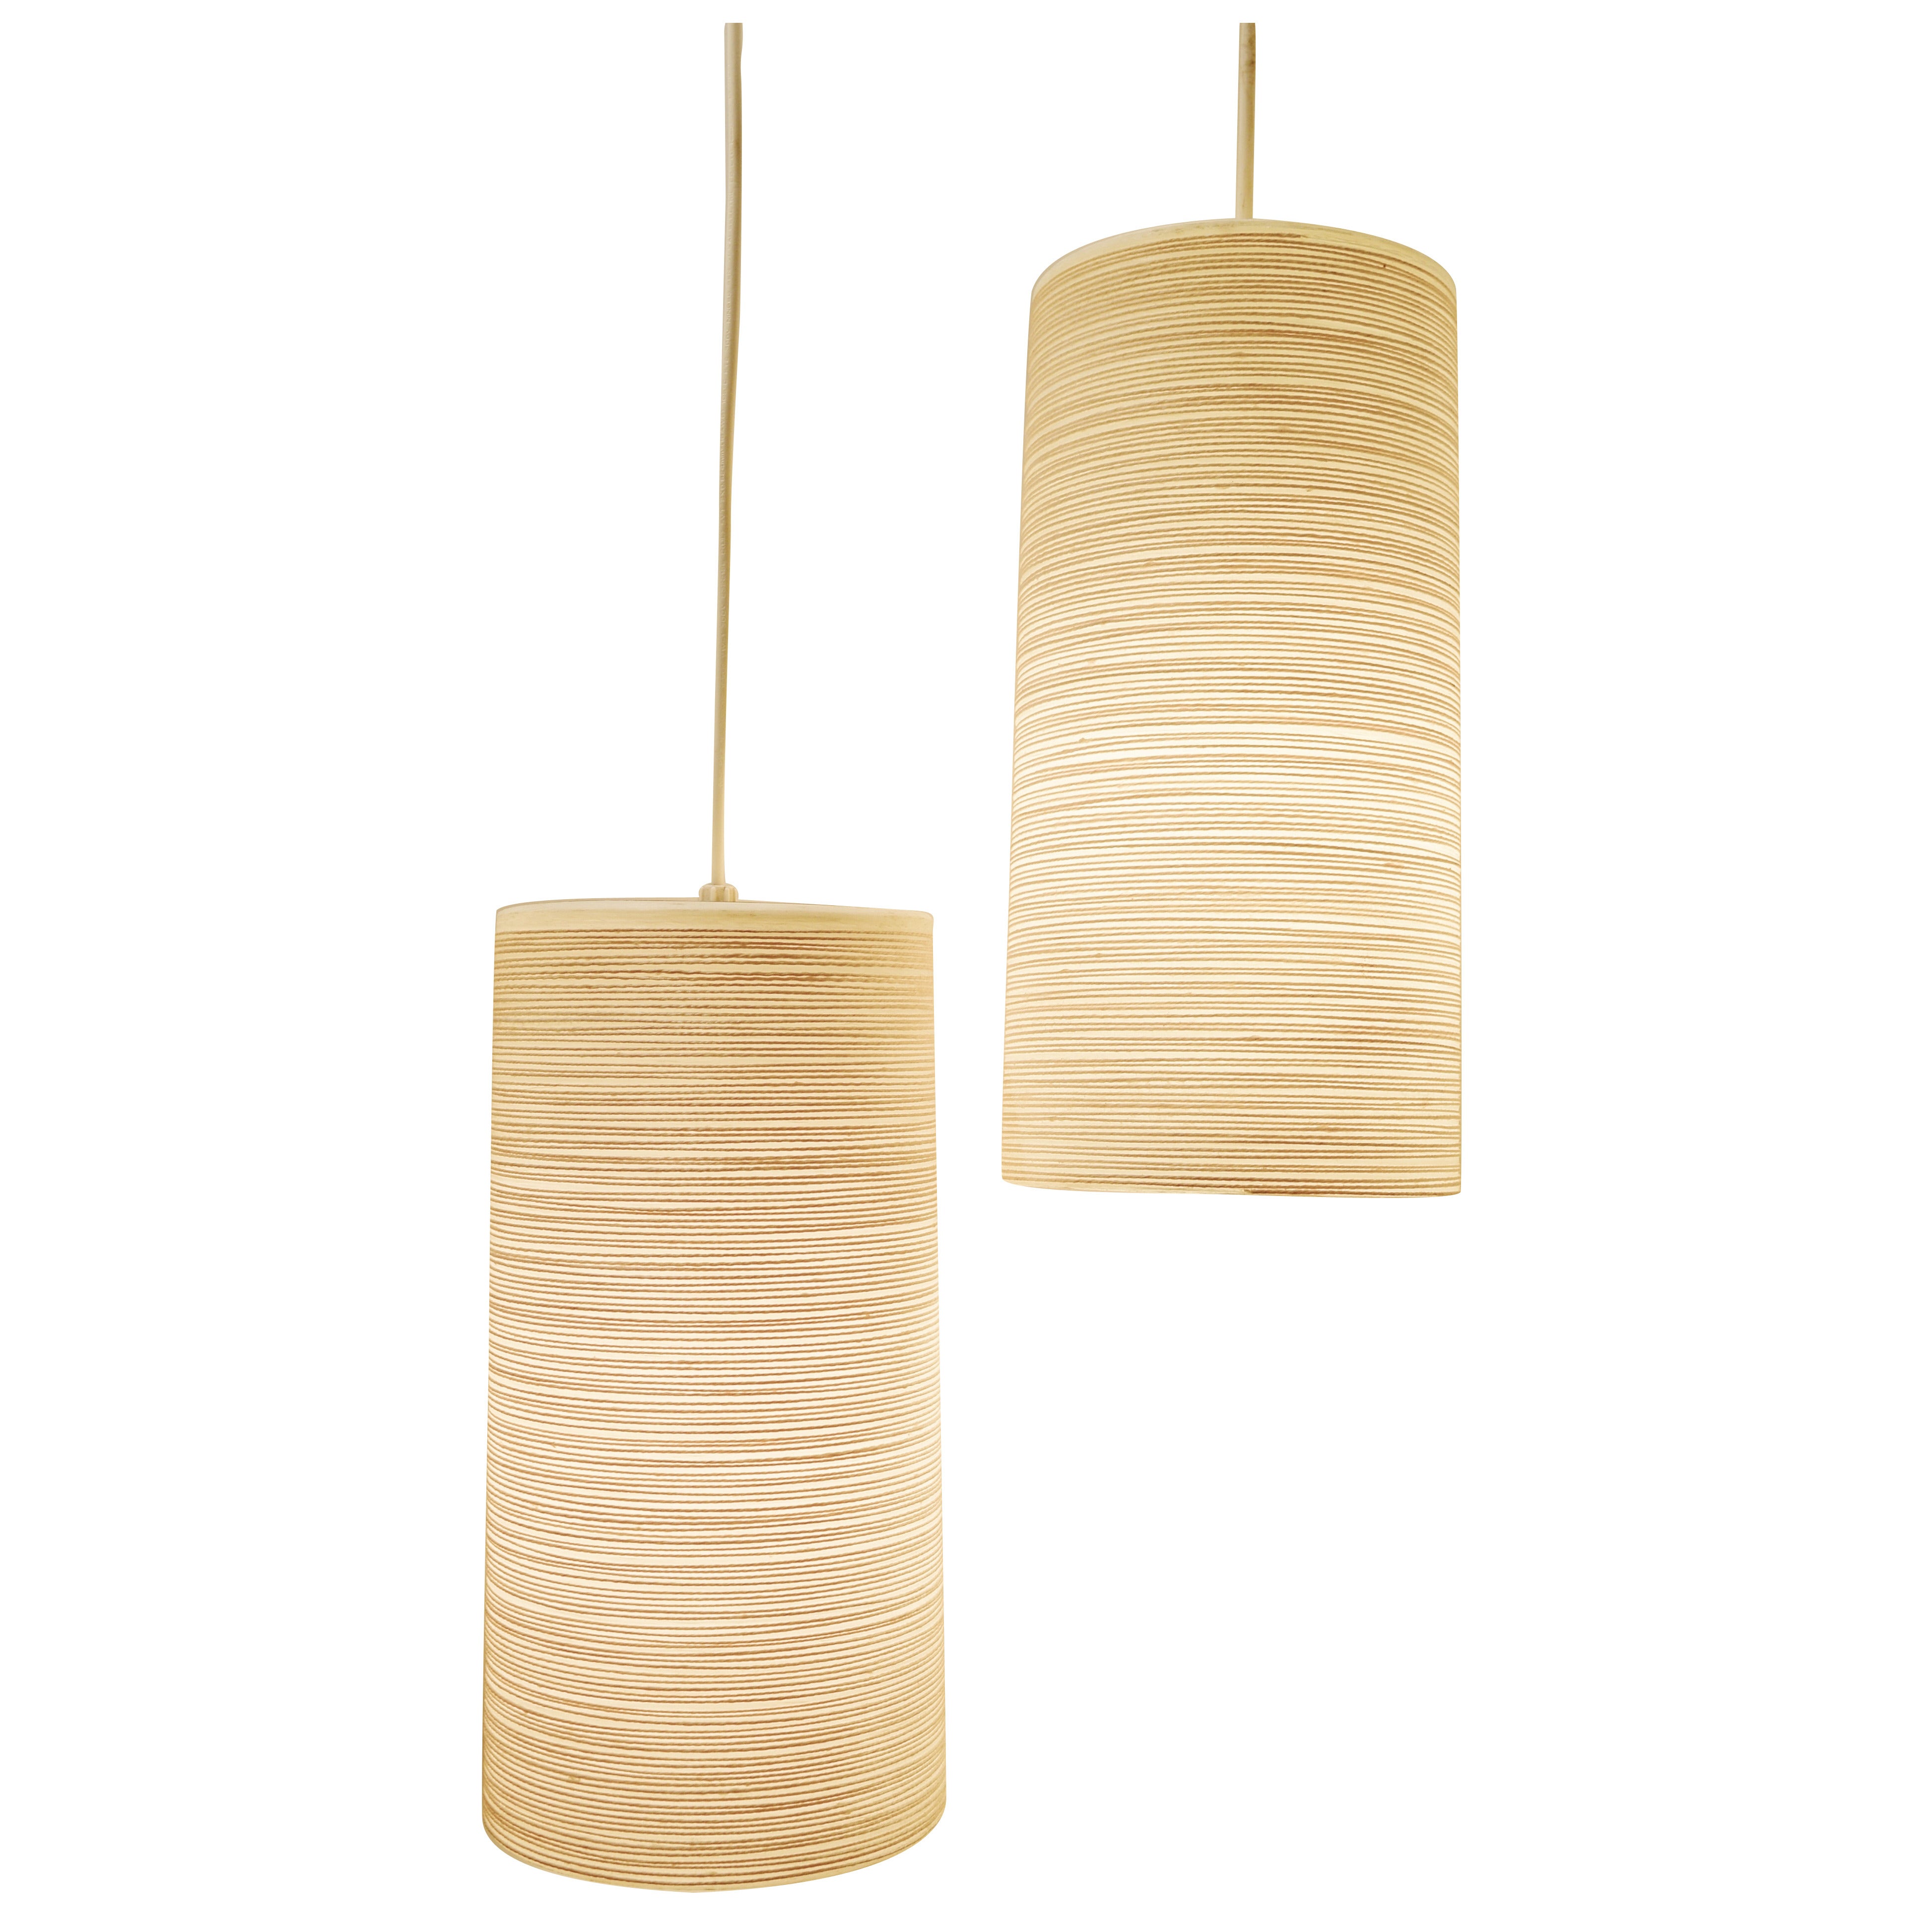 Two Pairs Organic Lotte Bostlund Fibreglass and Wool Cylinder Swag Lamps